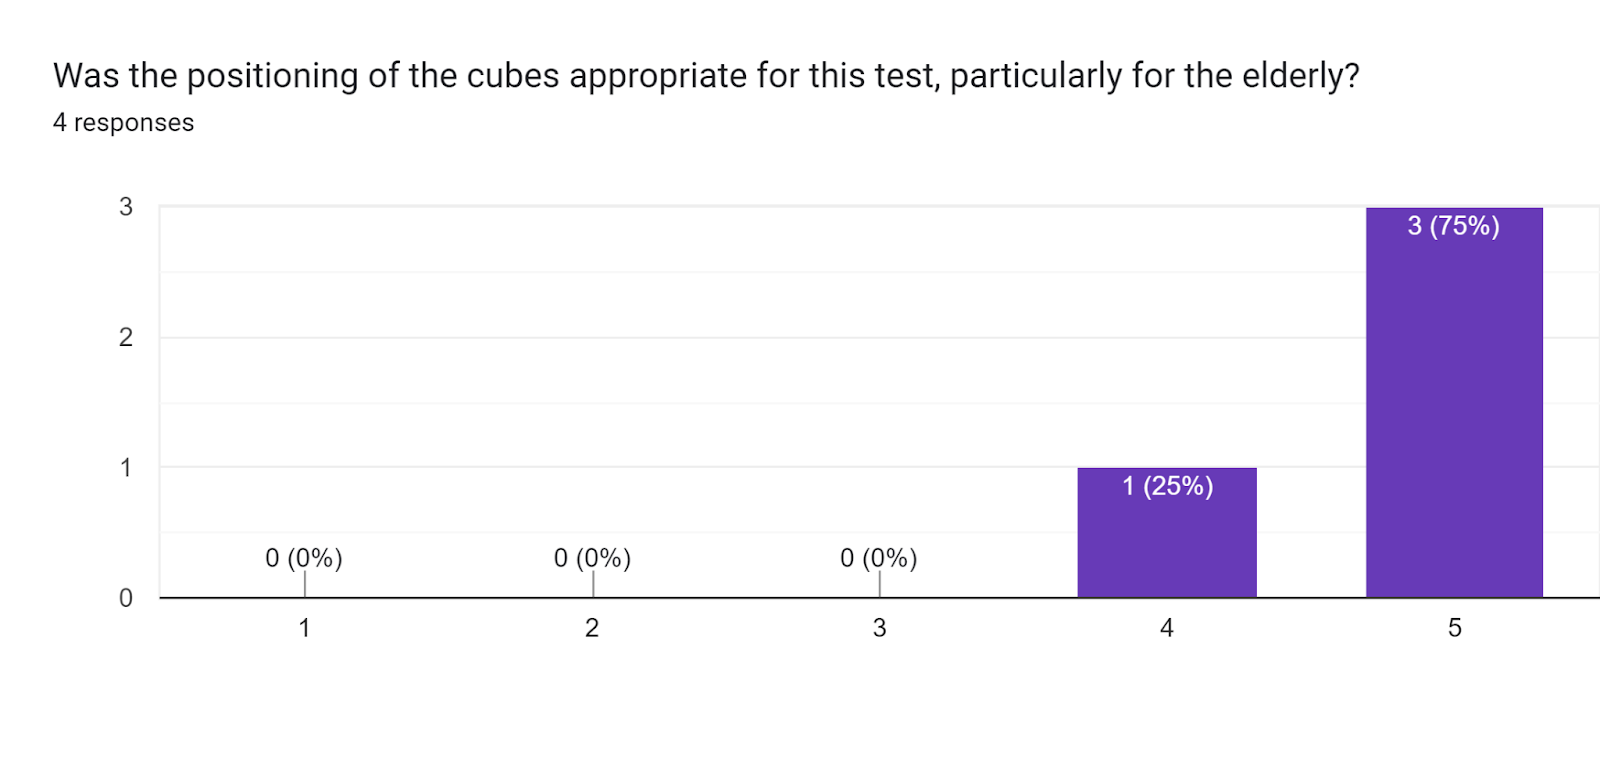 Forms response chart. Question title: Was the positioning of the cubes appropriate for this test, particularly for the elderly?. Number of responses: 4 responses.